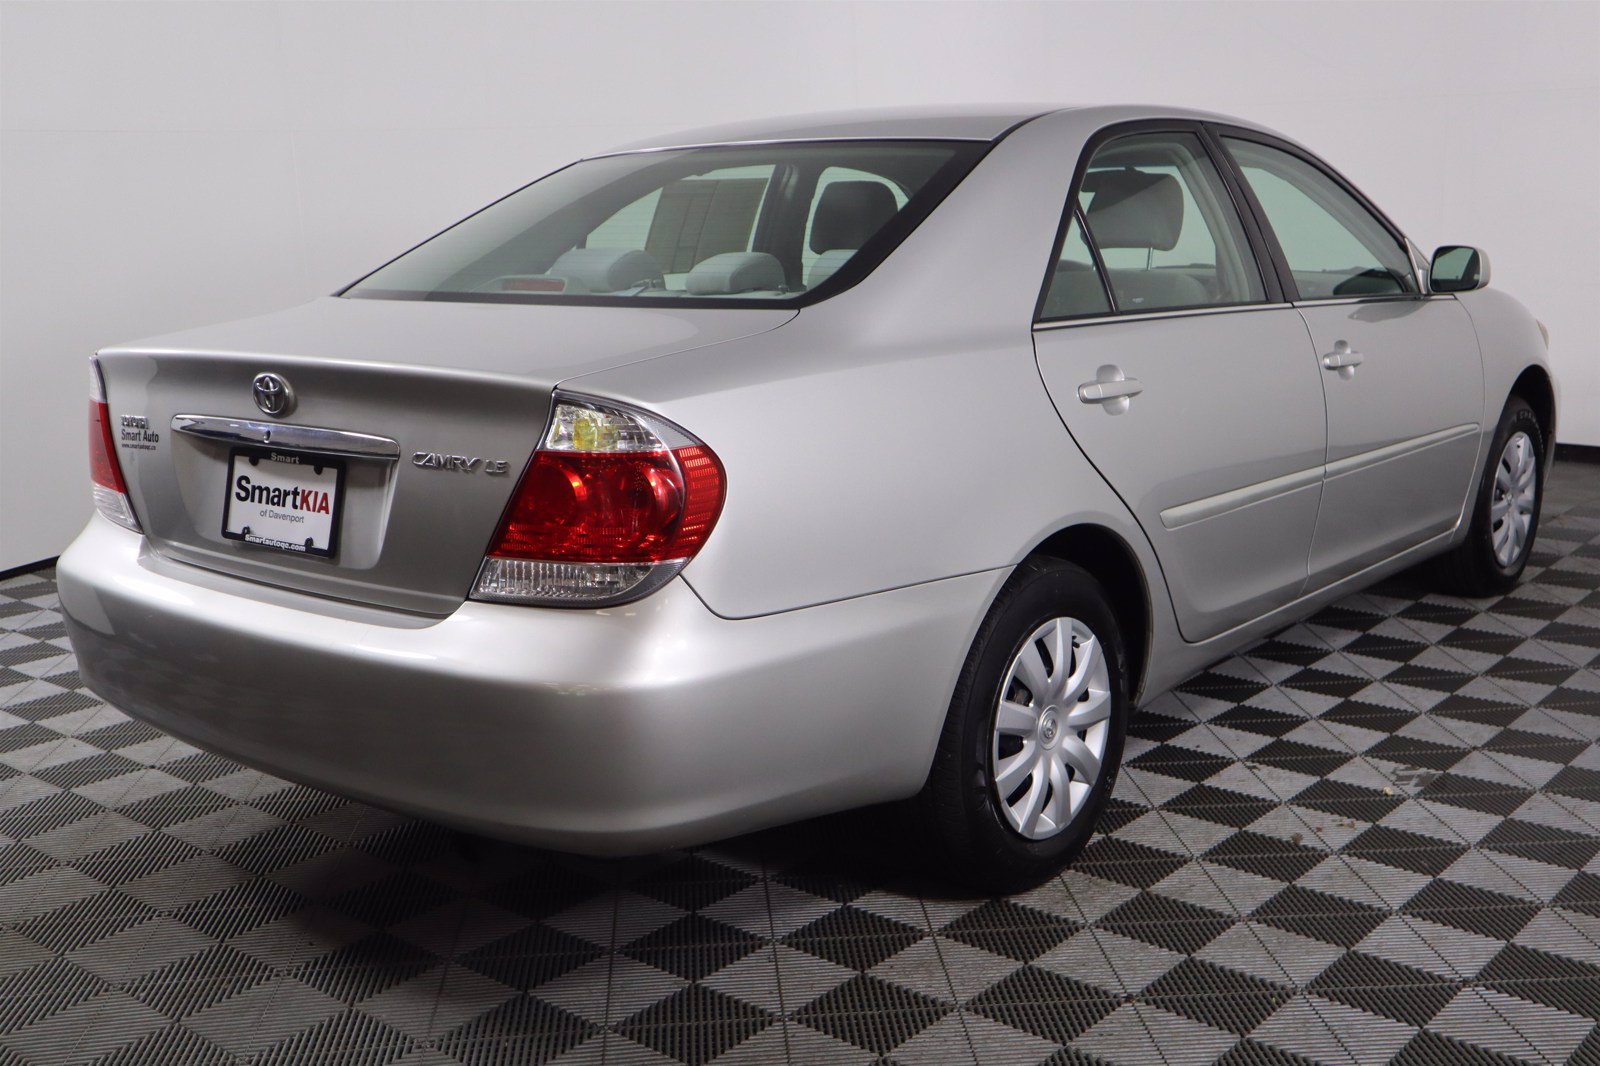 PreOwned 2005 Toyota Camry LE